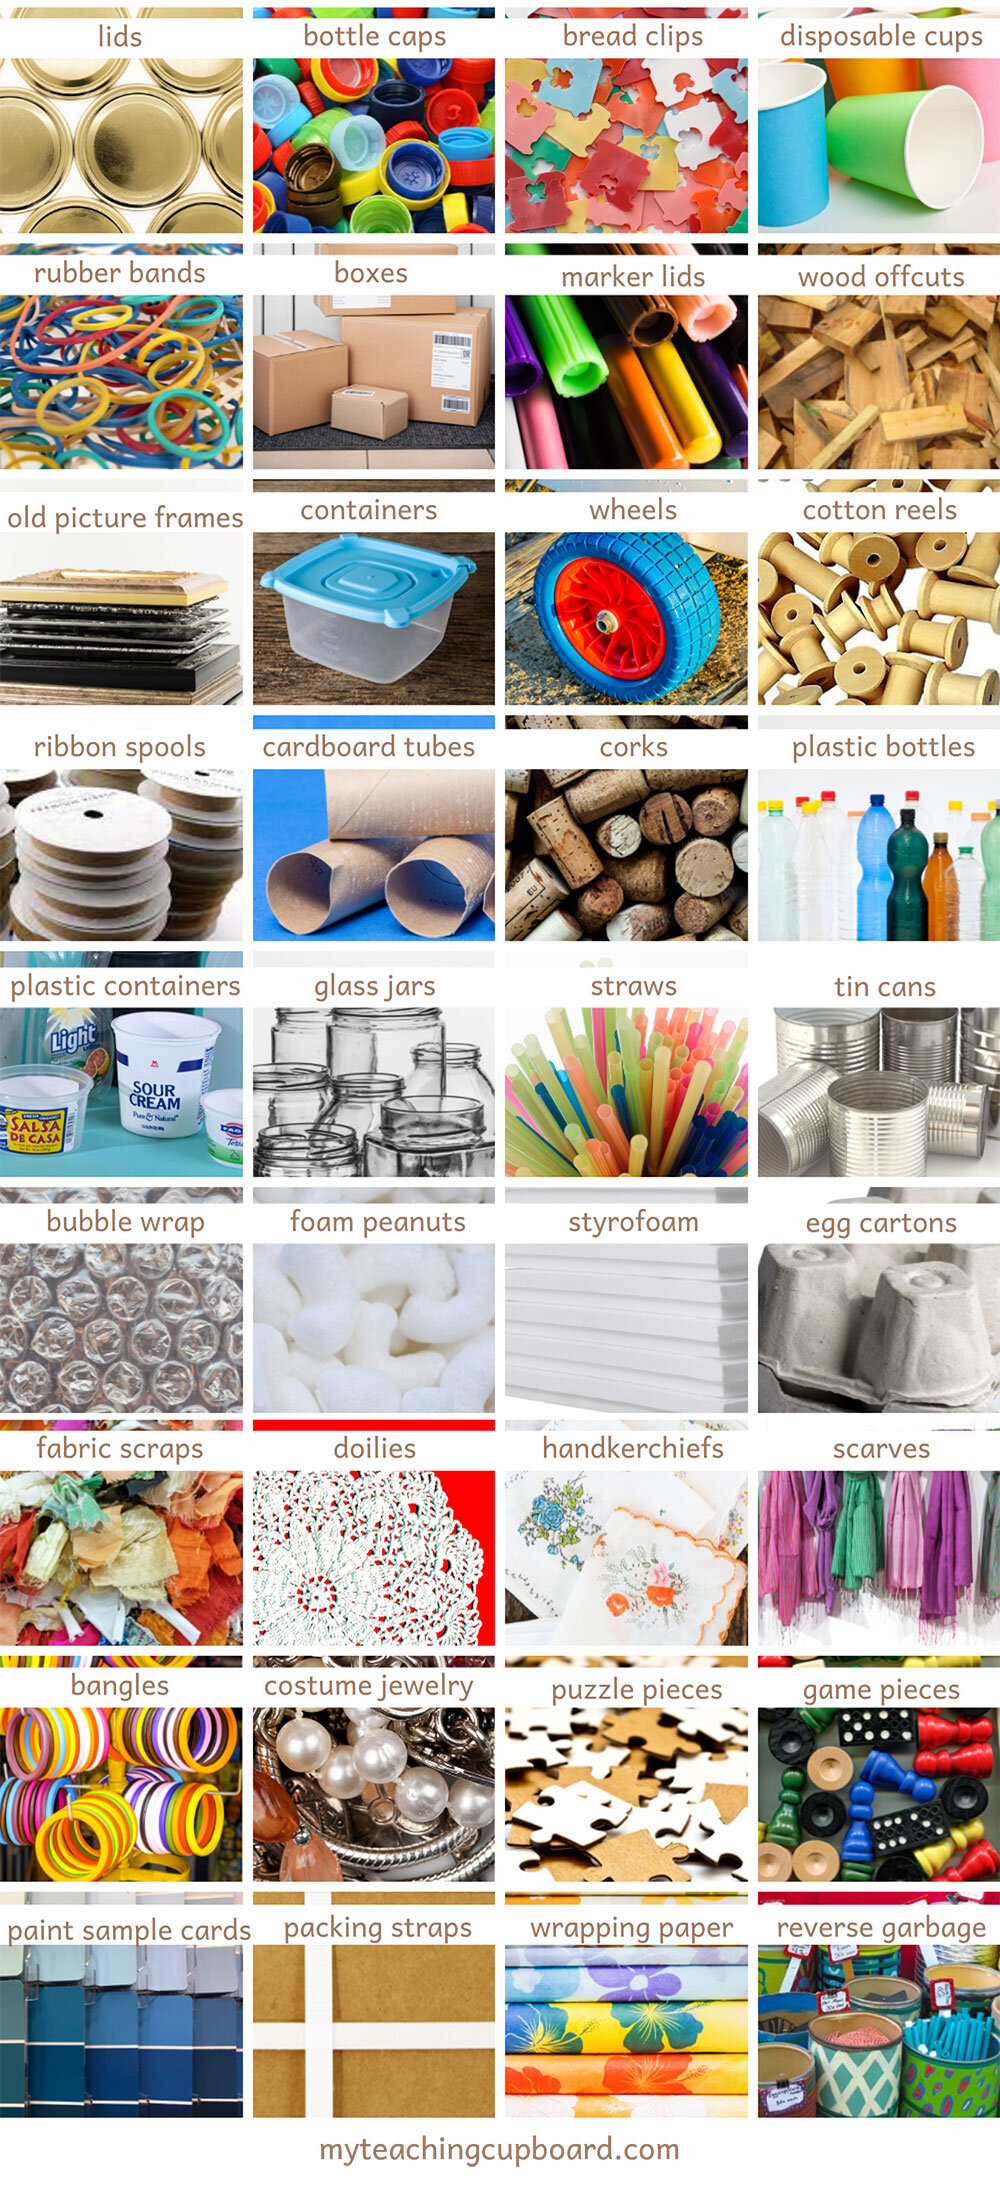 Materials For Loose Parts Play - At Least 100 Ideas! - Early Impact Learning